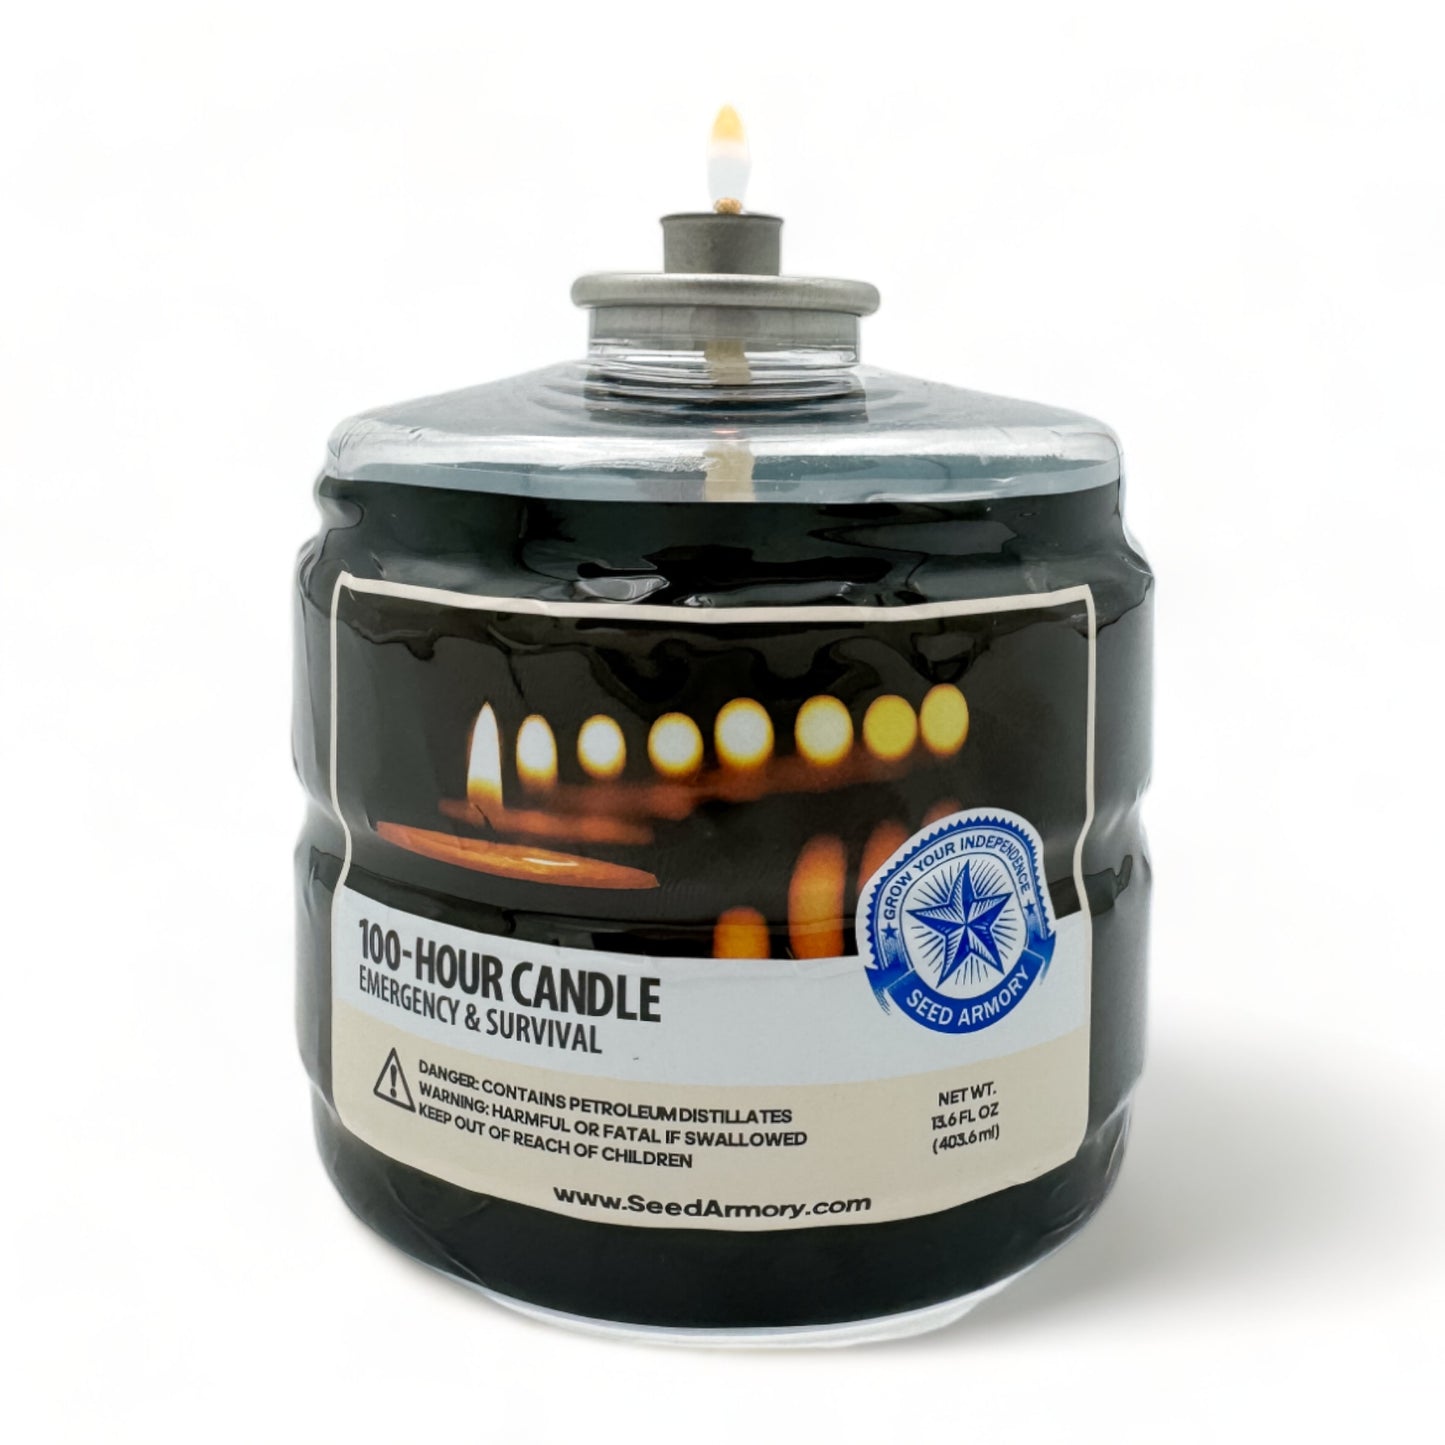 Emergency candle designed for 100 hours of light, featuring a detailed label with instructions